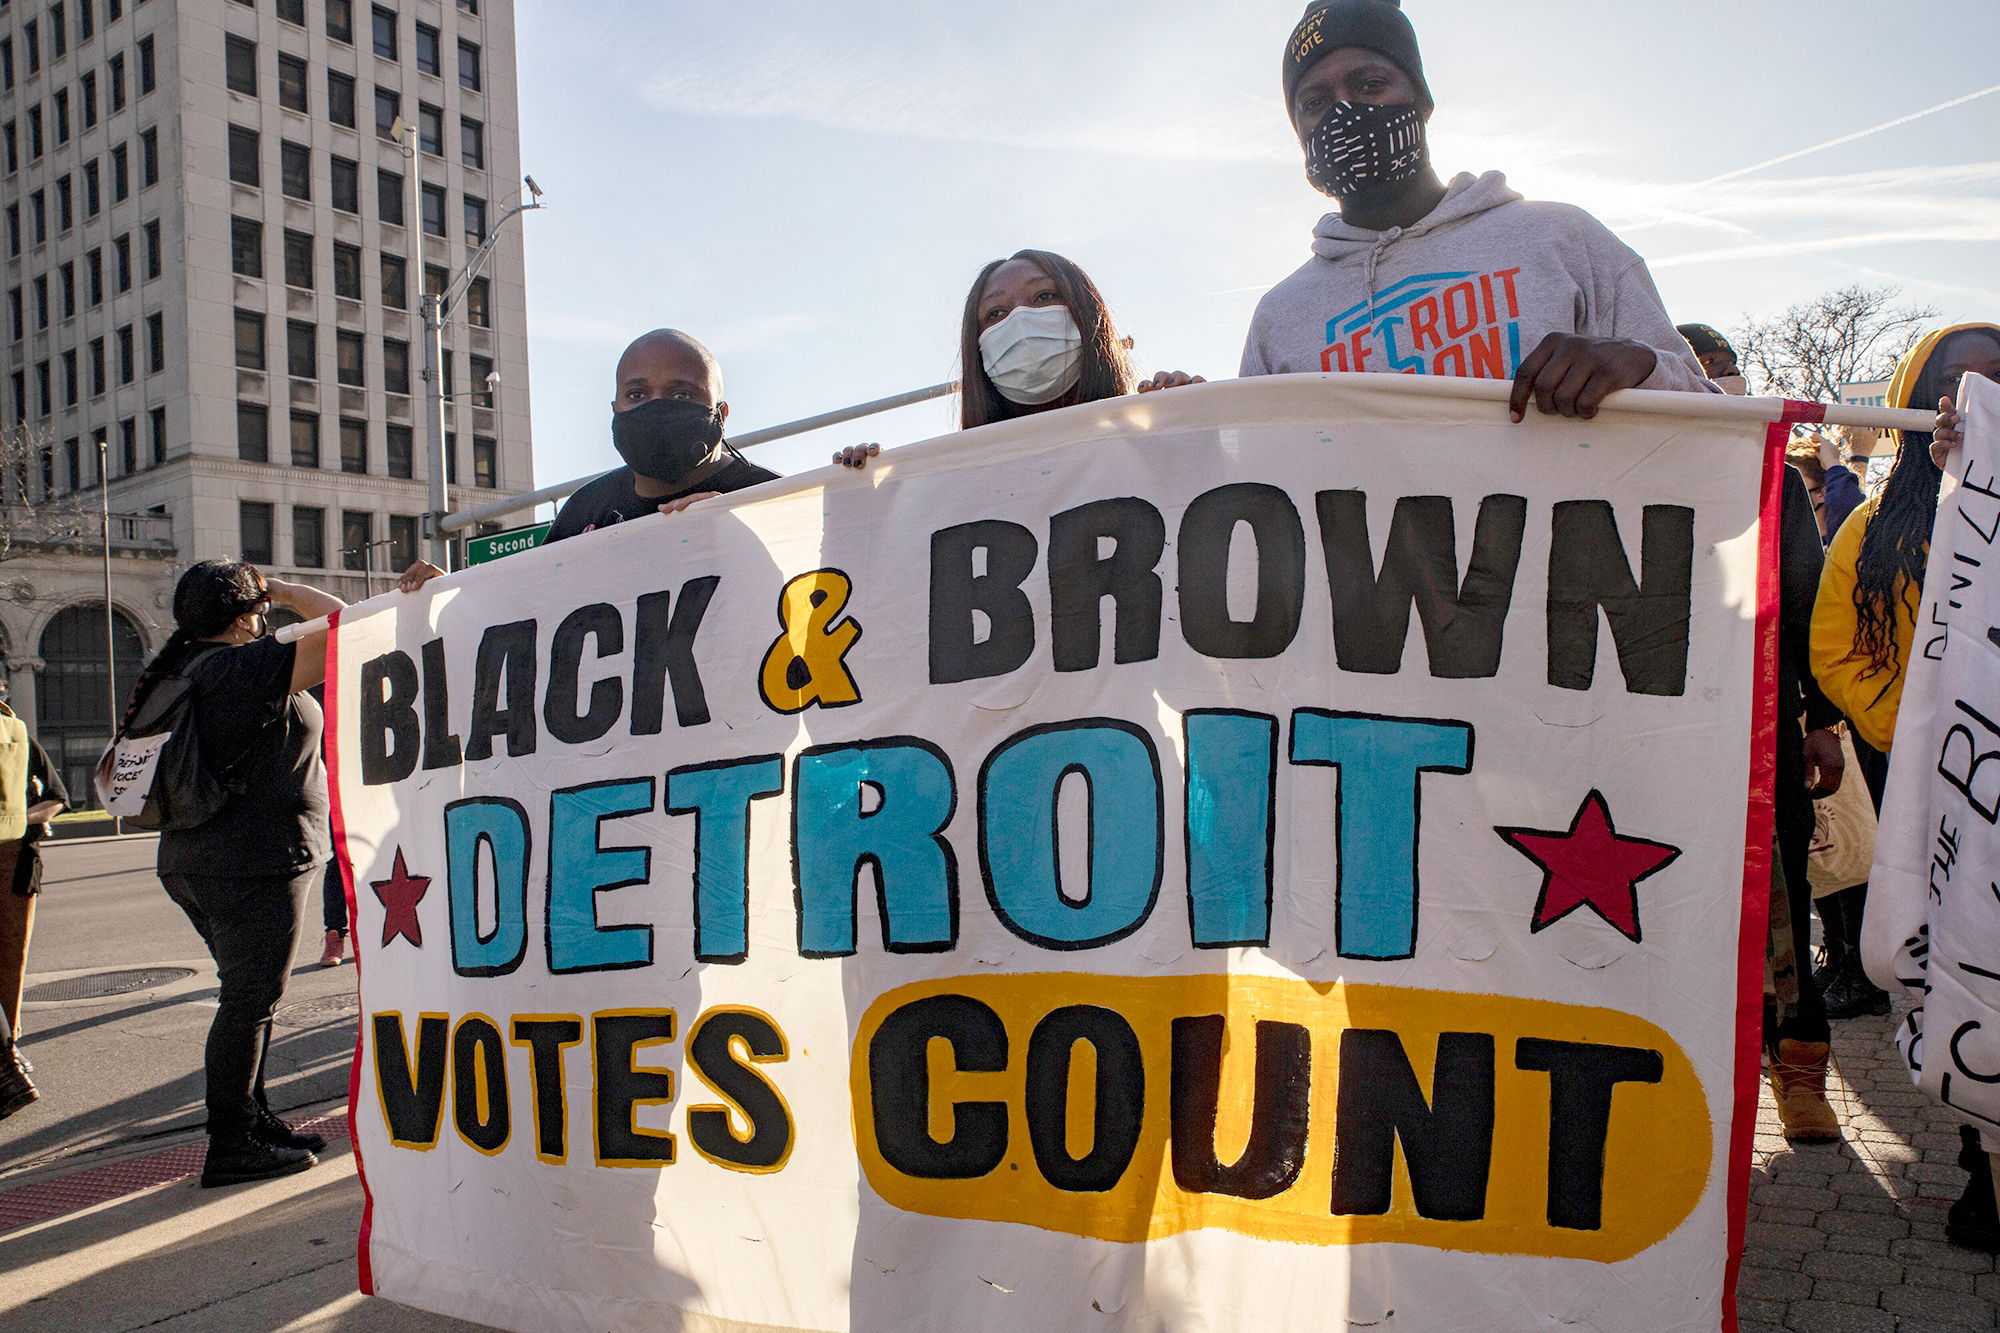 PHOTO: Demonstrators hold a banner that says Black and Brown Votes Count, during a protest in Detroit, Nov. 7, 2020.